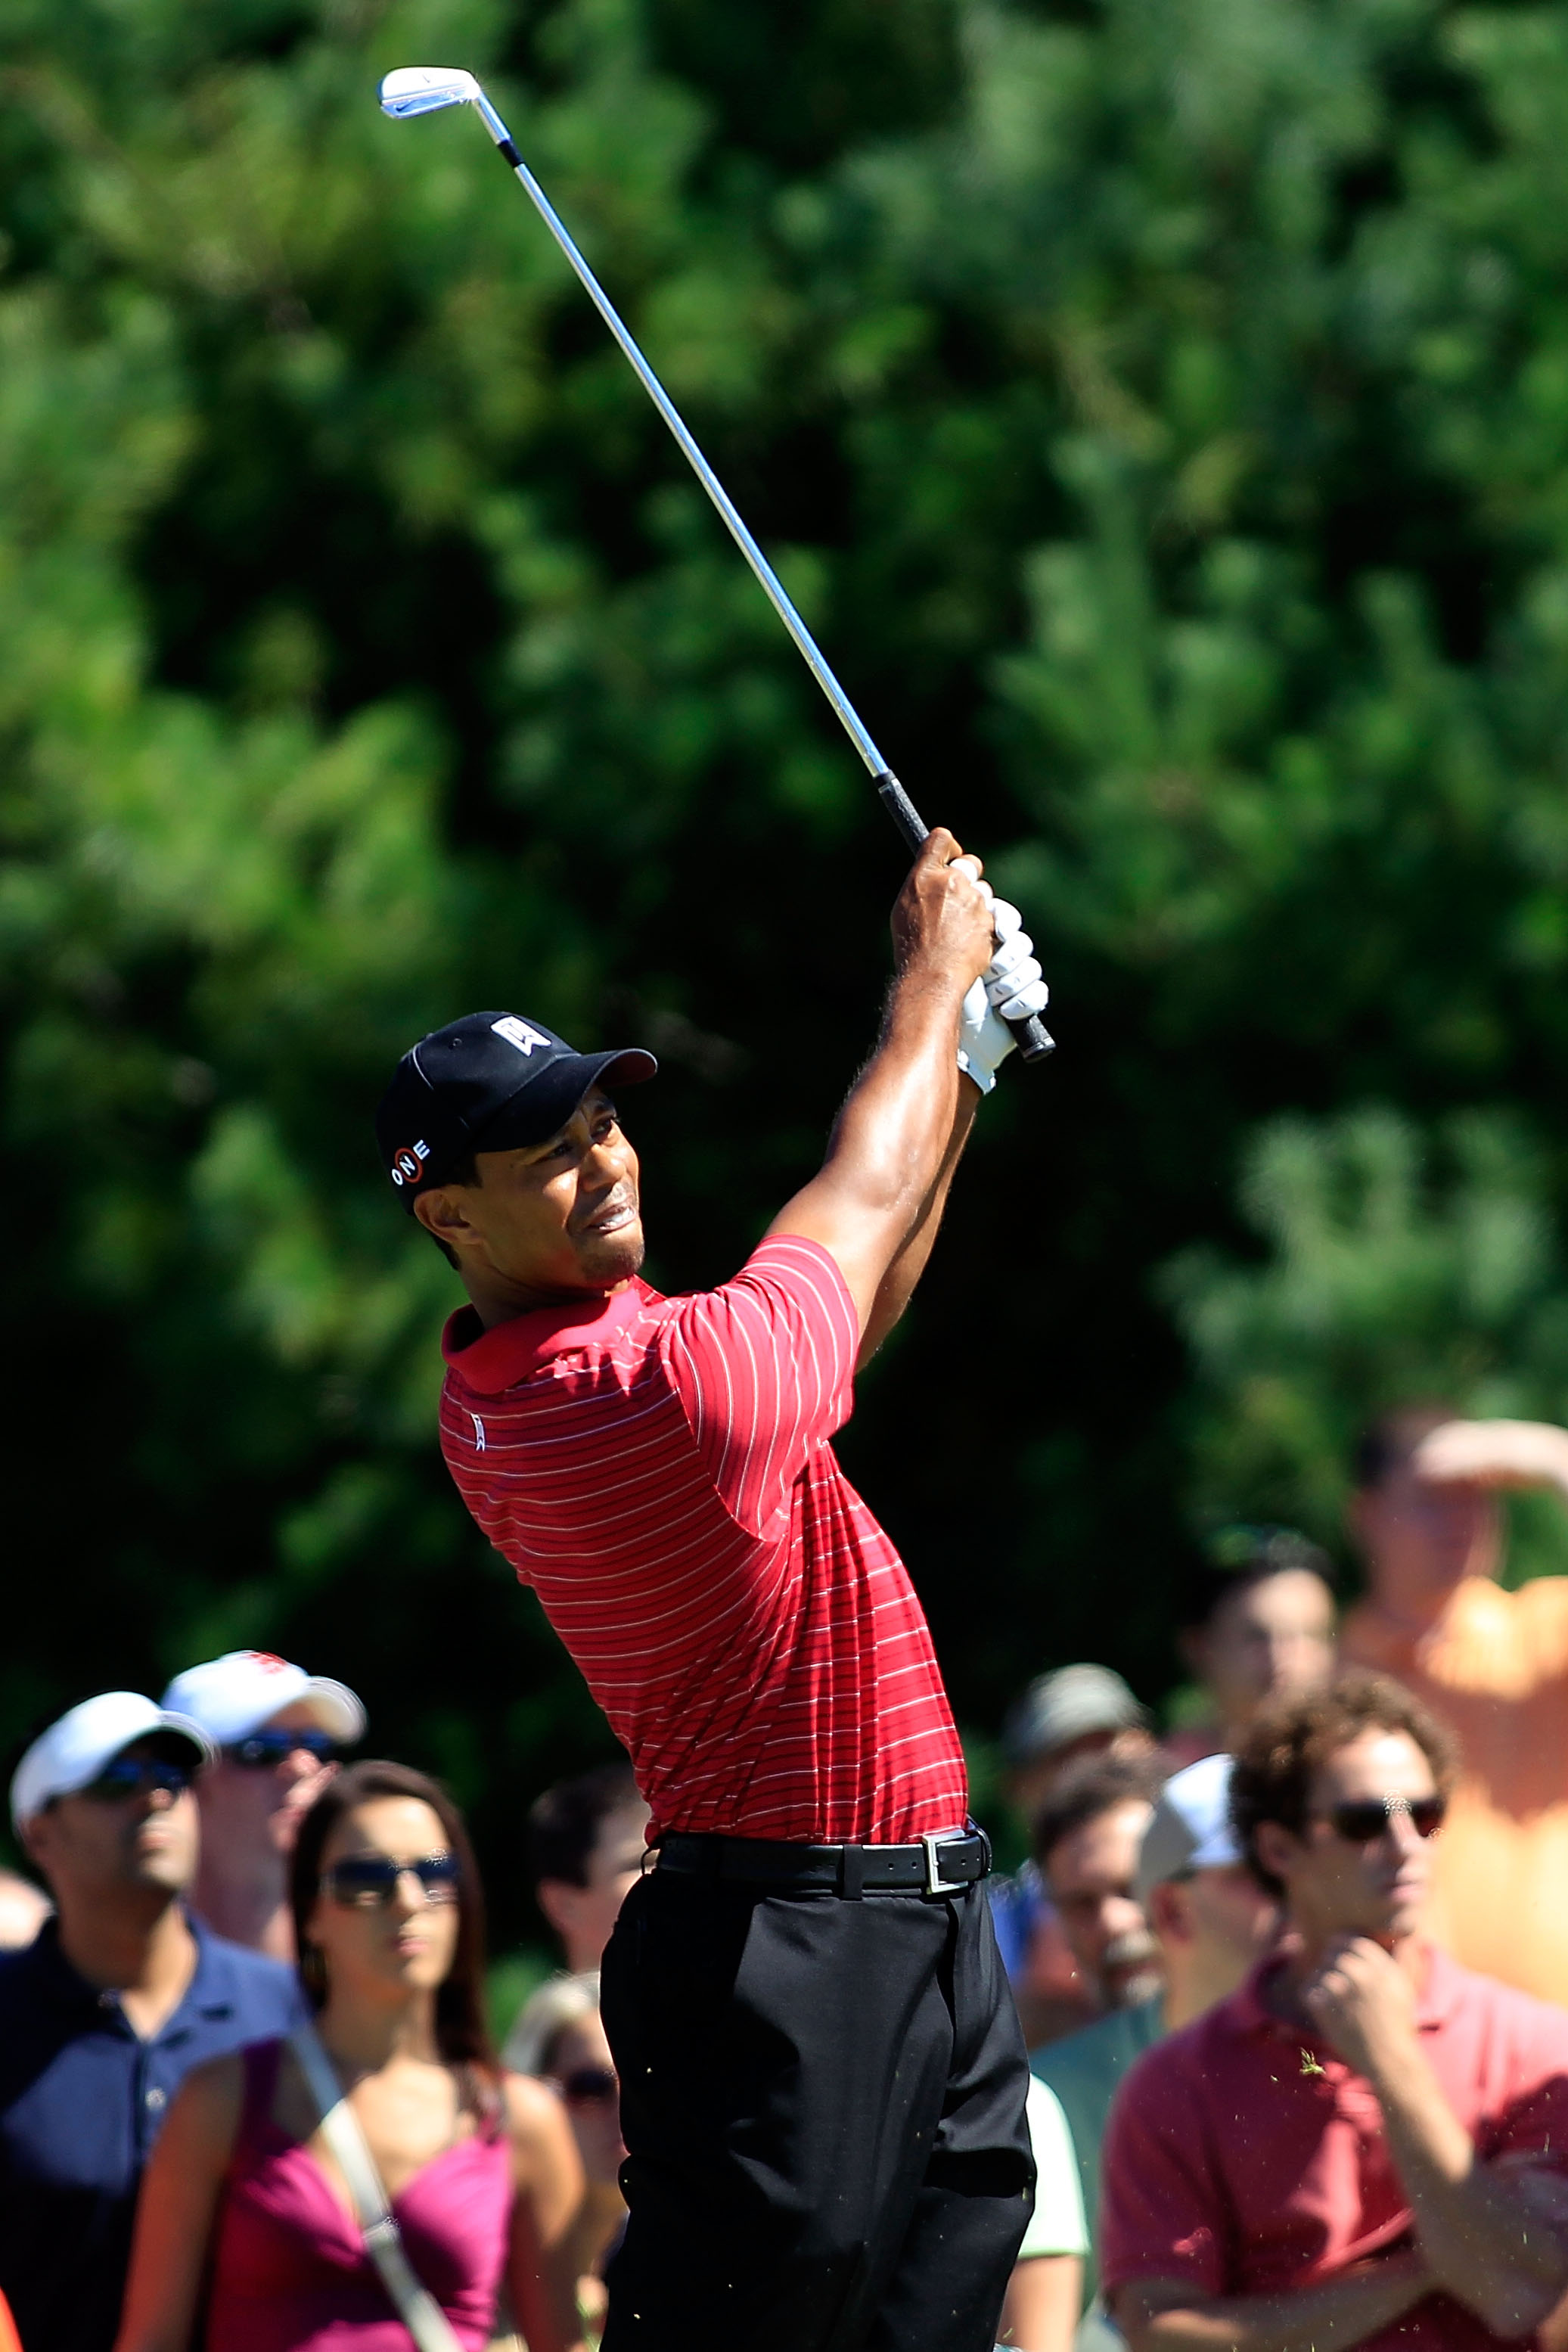 NORTON, MA - SEPTEMBER 06:  Tiger Woods hits a tee shot on the third hole during the final round of the Deutsche Bank Championship at TPC Boston on September 6, 2010 in Norton, Massachusetts.  (Photo by Michael Cohen/Getty Images)